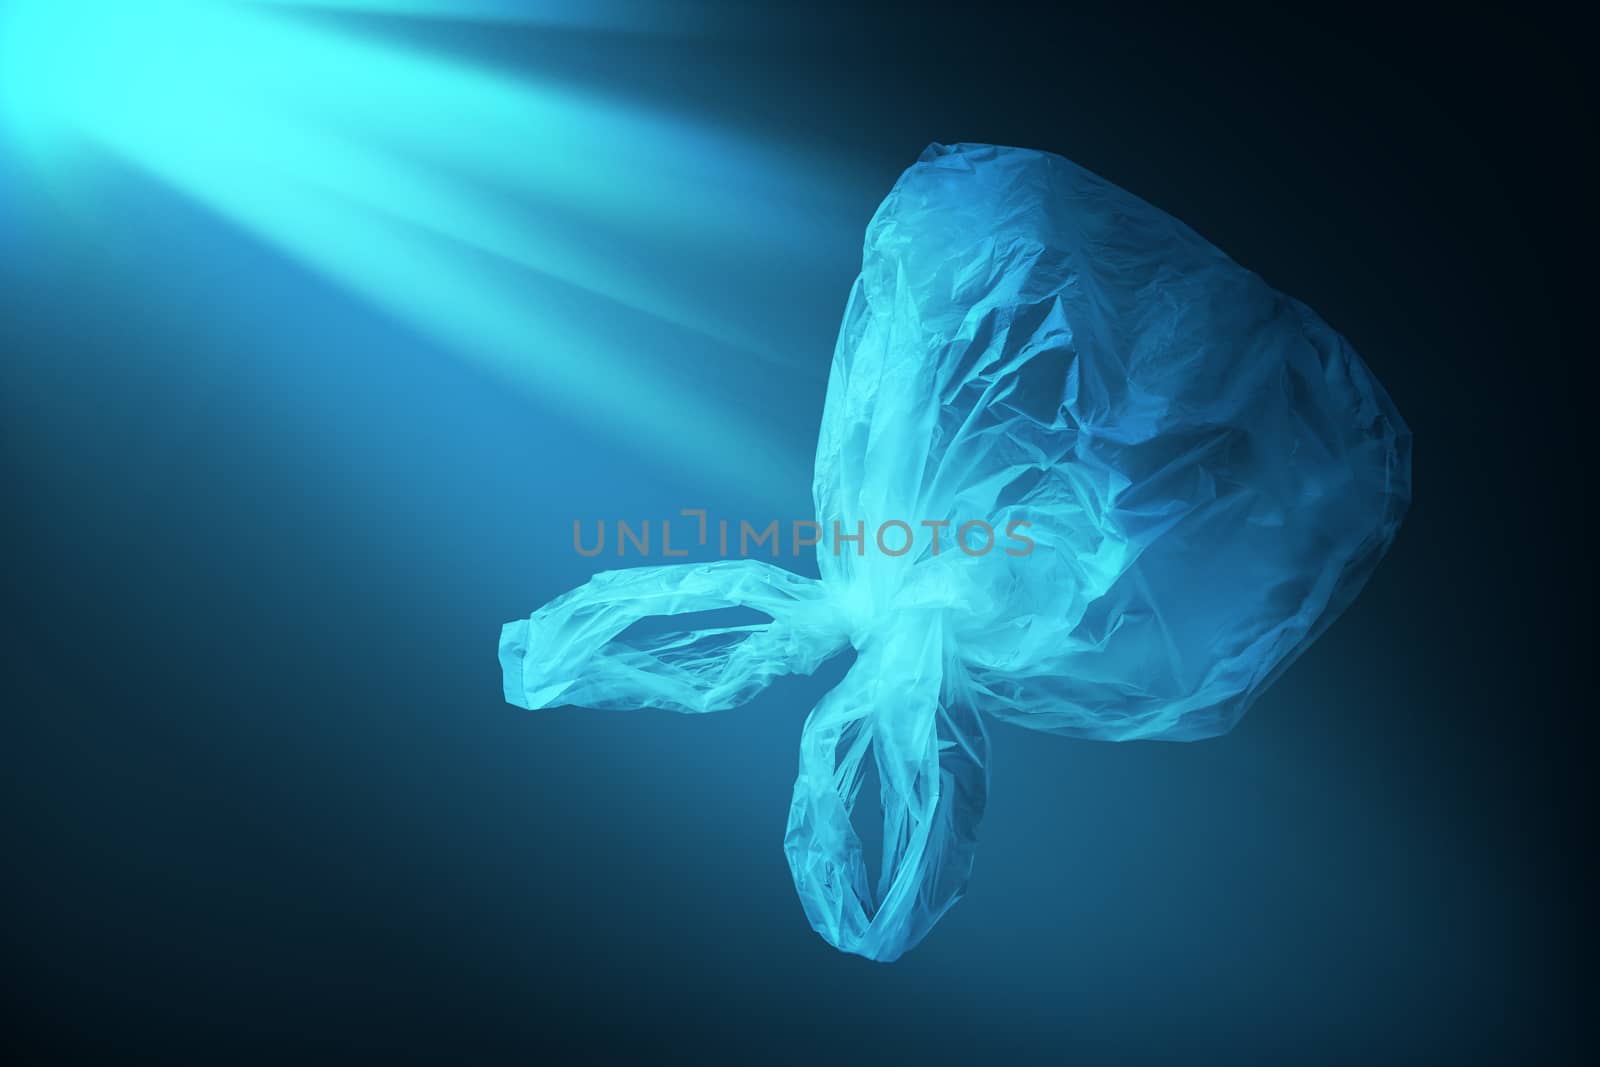 creative background of single-use transparent plastic bags in form of jellyfish floating in sea or ocean with sunlight effect, concept of environmental pollution